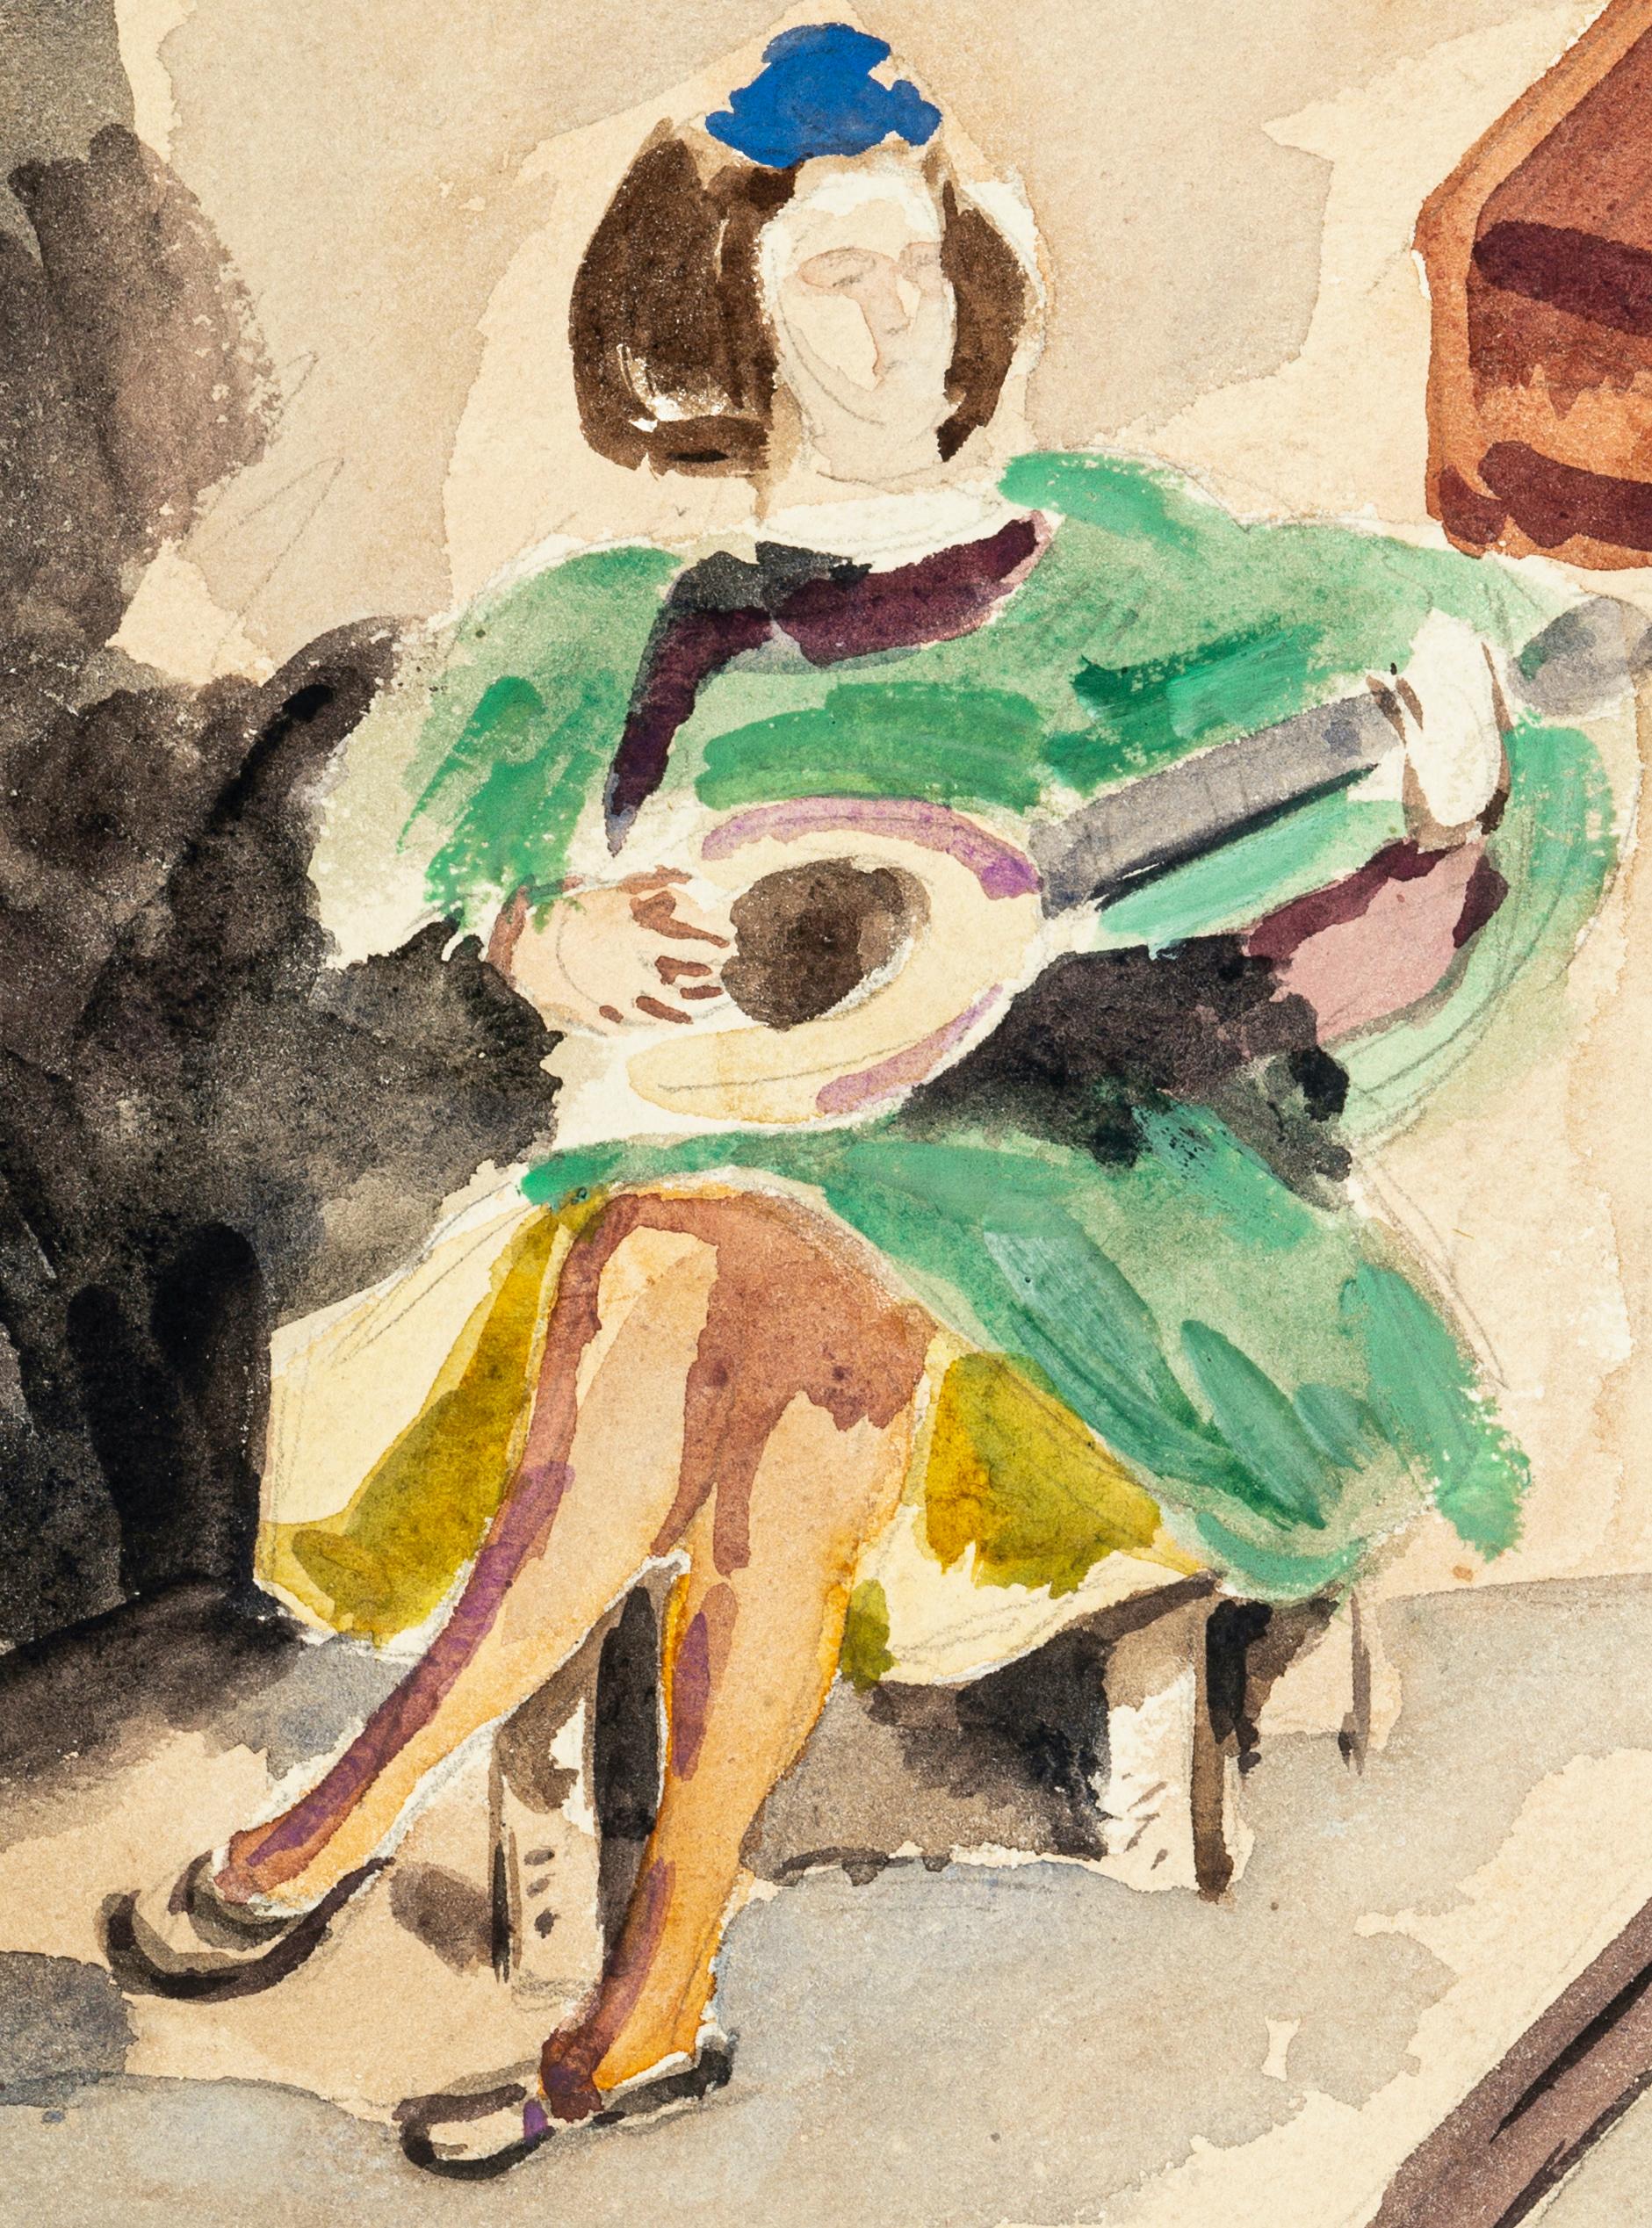 La Guitariste is a colored watercolor realized by Jean Chapin in the First Half 20th Century.

The artwork represents a woman playing guitar.  

Good conditions.

Jean Chapin (Paris, 1896 - 1994), a French artist who exhibited his work at the Salon